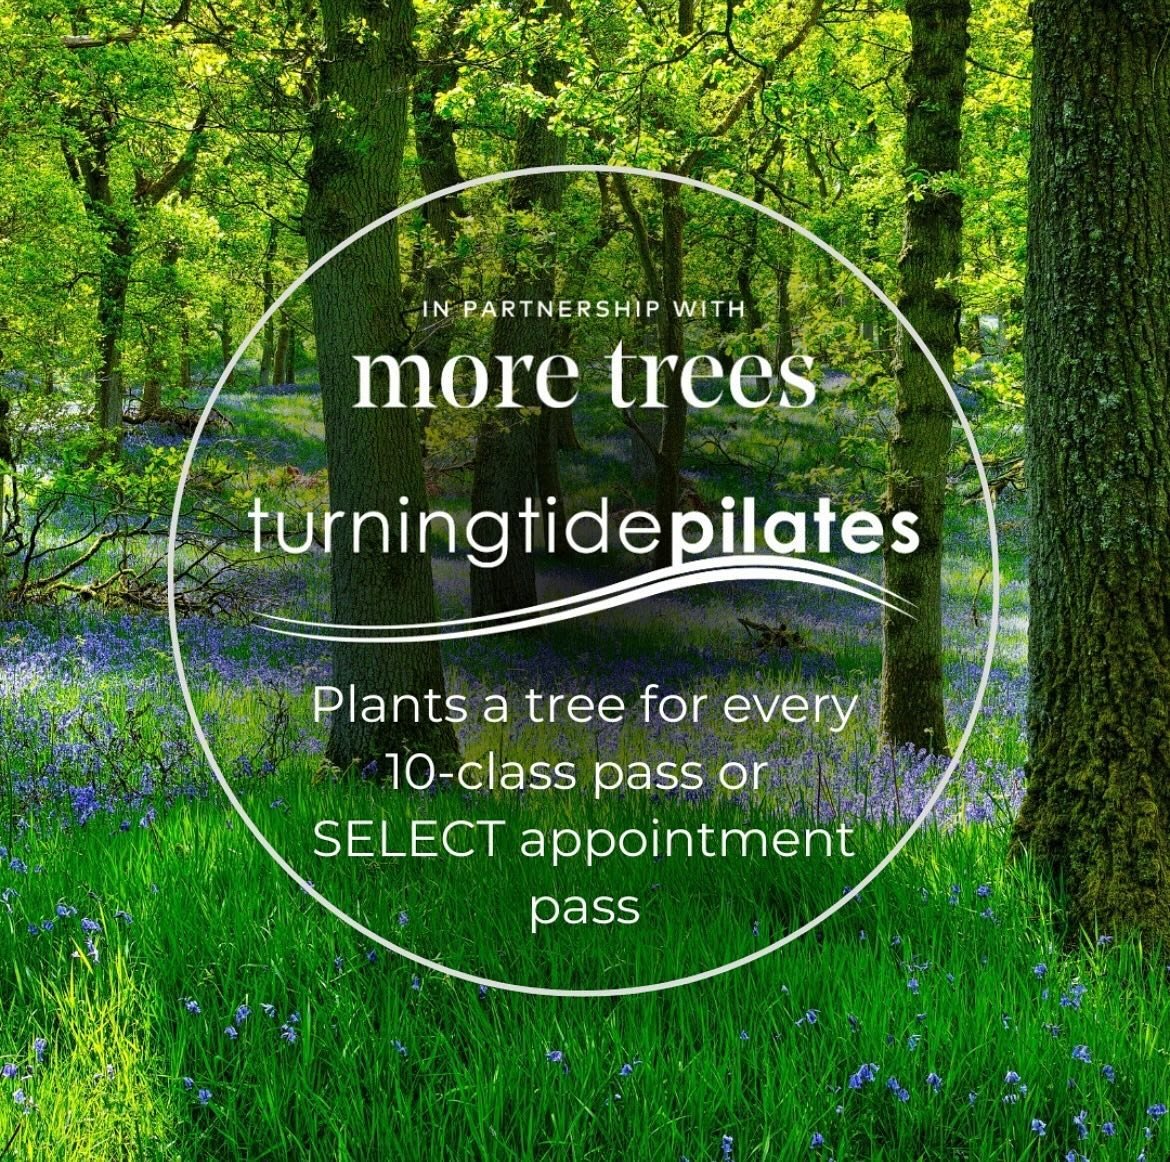 Thrilled to be featured on @moretreesthgeco instagram feed today! Since partnering with them, we&rsquo;ve planted 359 trees on behalf of our clients!

Did you know that every time you purchase a 10 class pass, or SELECT appointment pass, we&rsquo;ll 